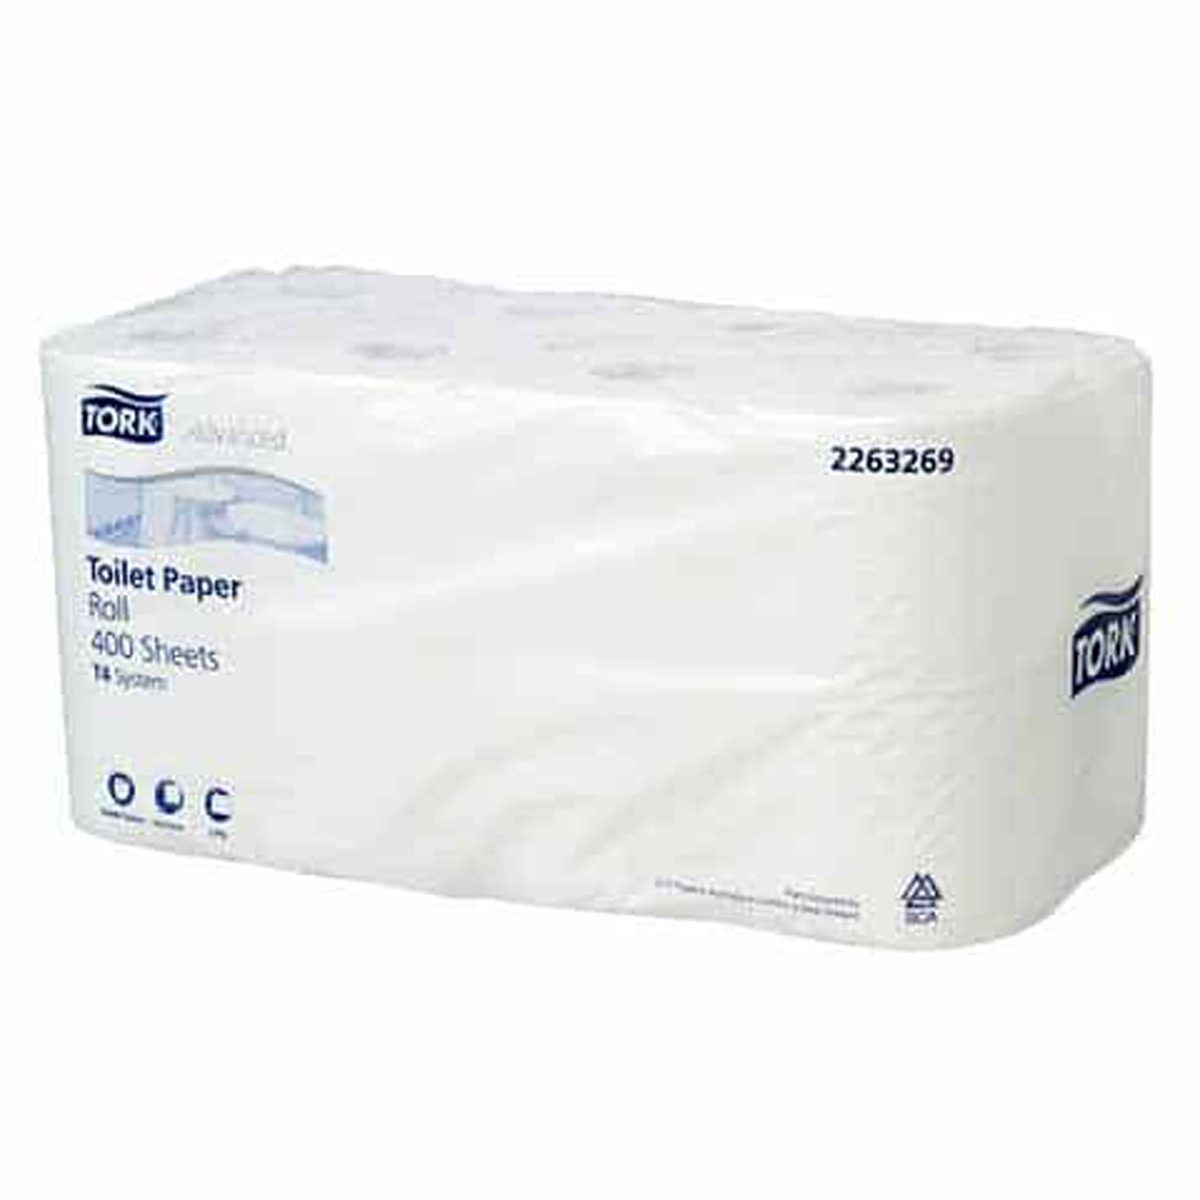 paper-products-toilet-paper-tork-toilet-paper-unwrapped-2ply-400s-48-rolls-t4-consistent-high-quality-and-value-features-quilt-emboss-extra-softness-vjs-distributors-2263269